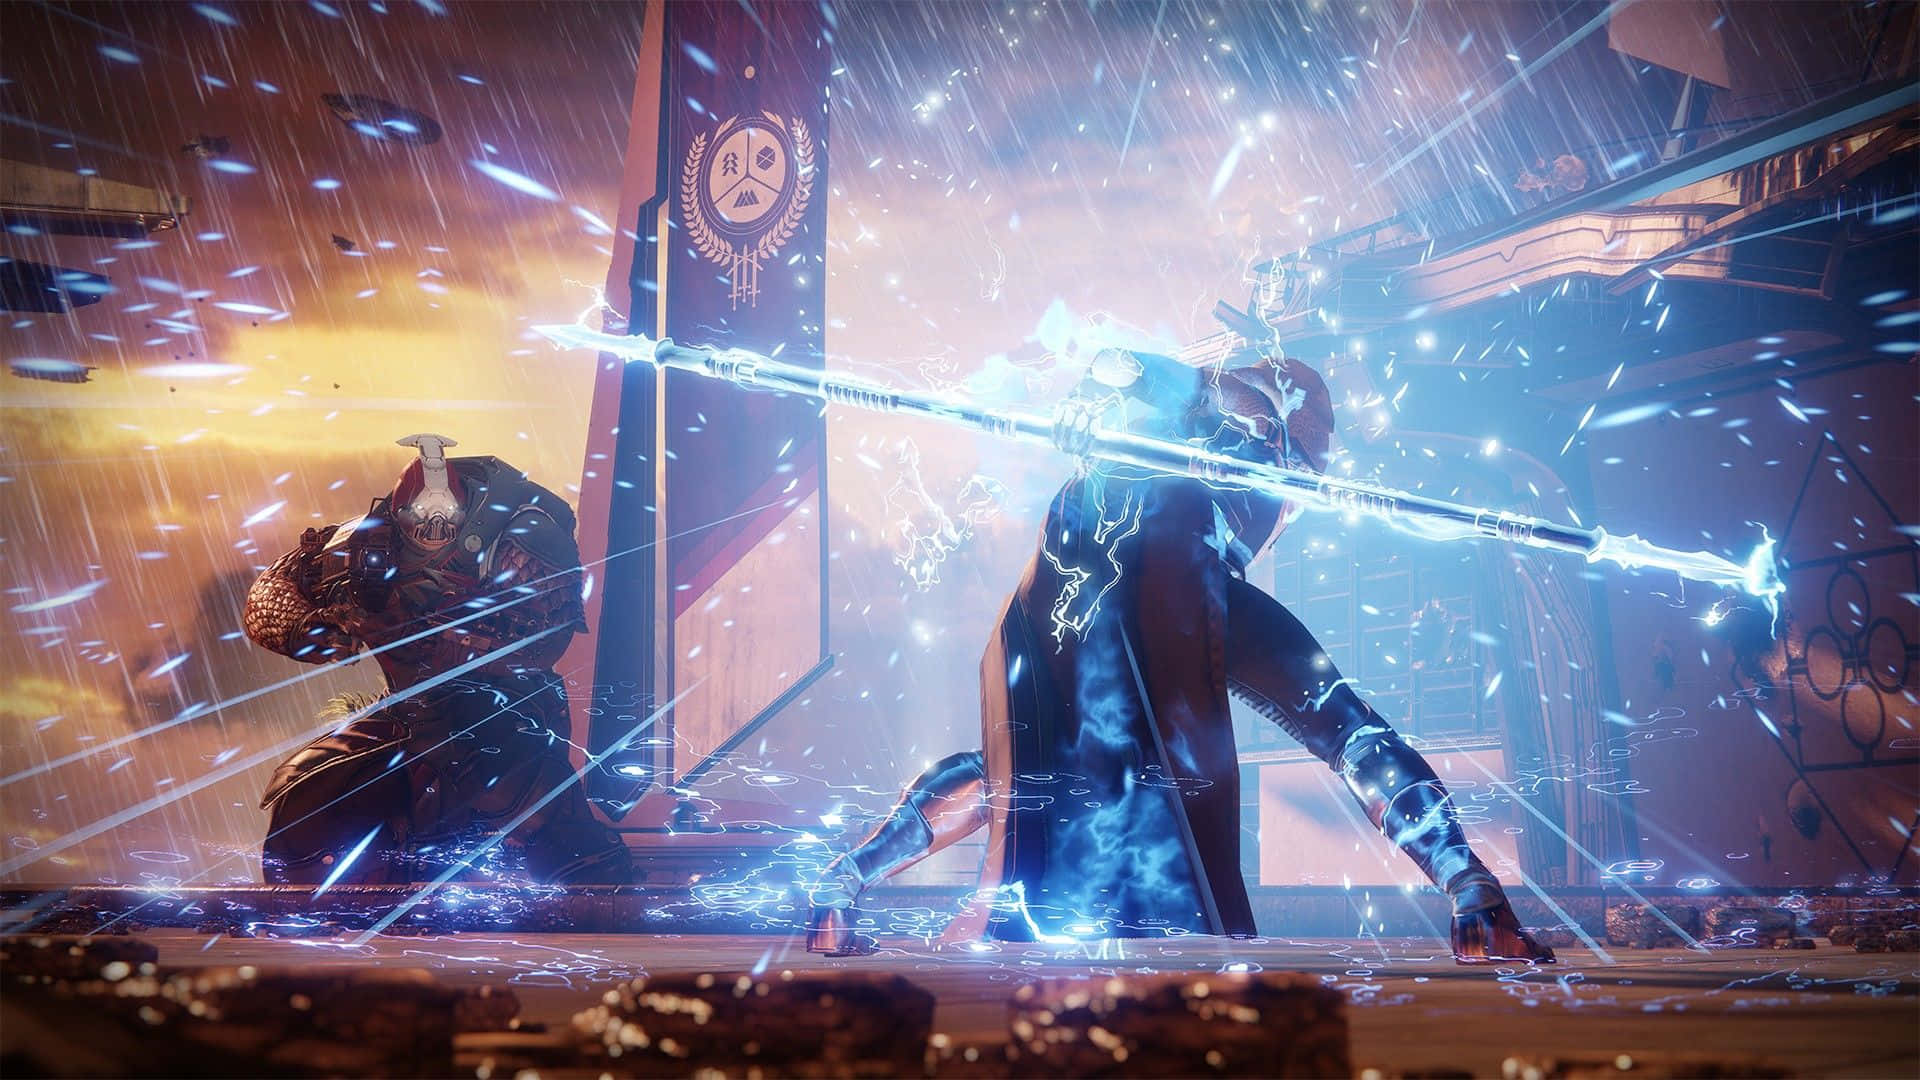 Feel the power of Destiny 2 in this dramatic gameplay screenshot